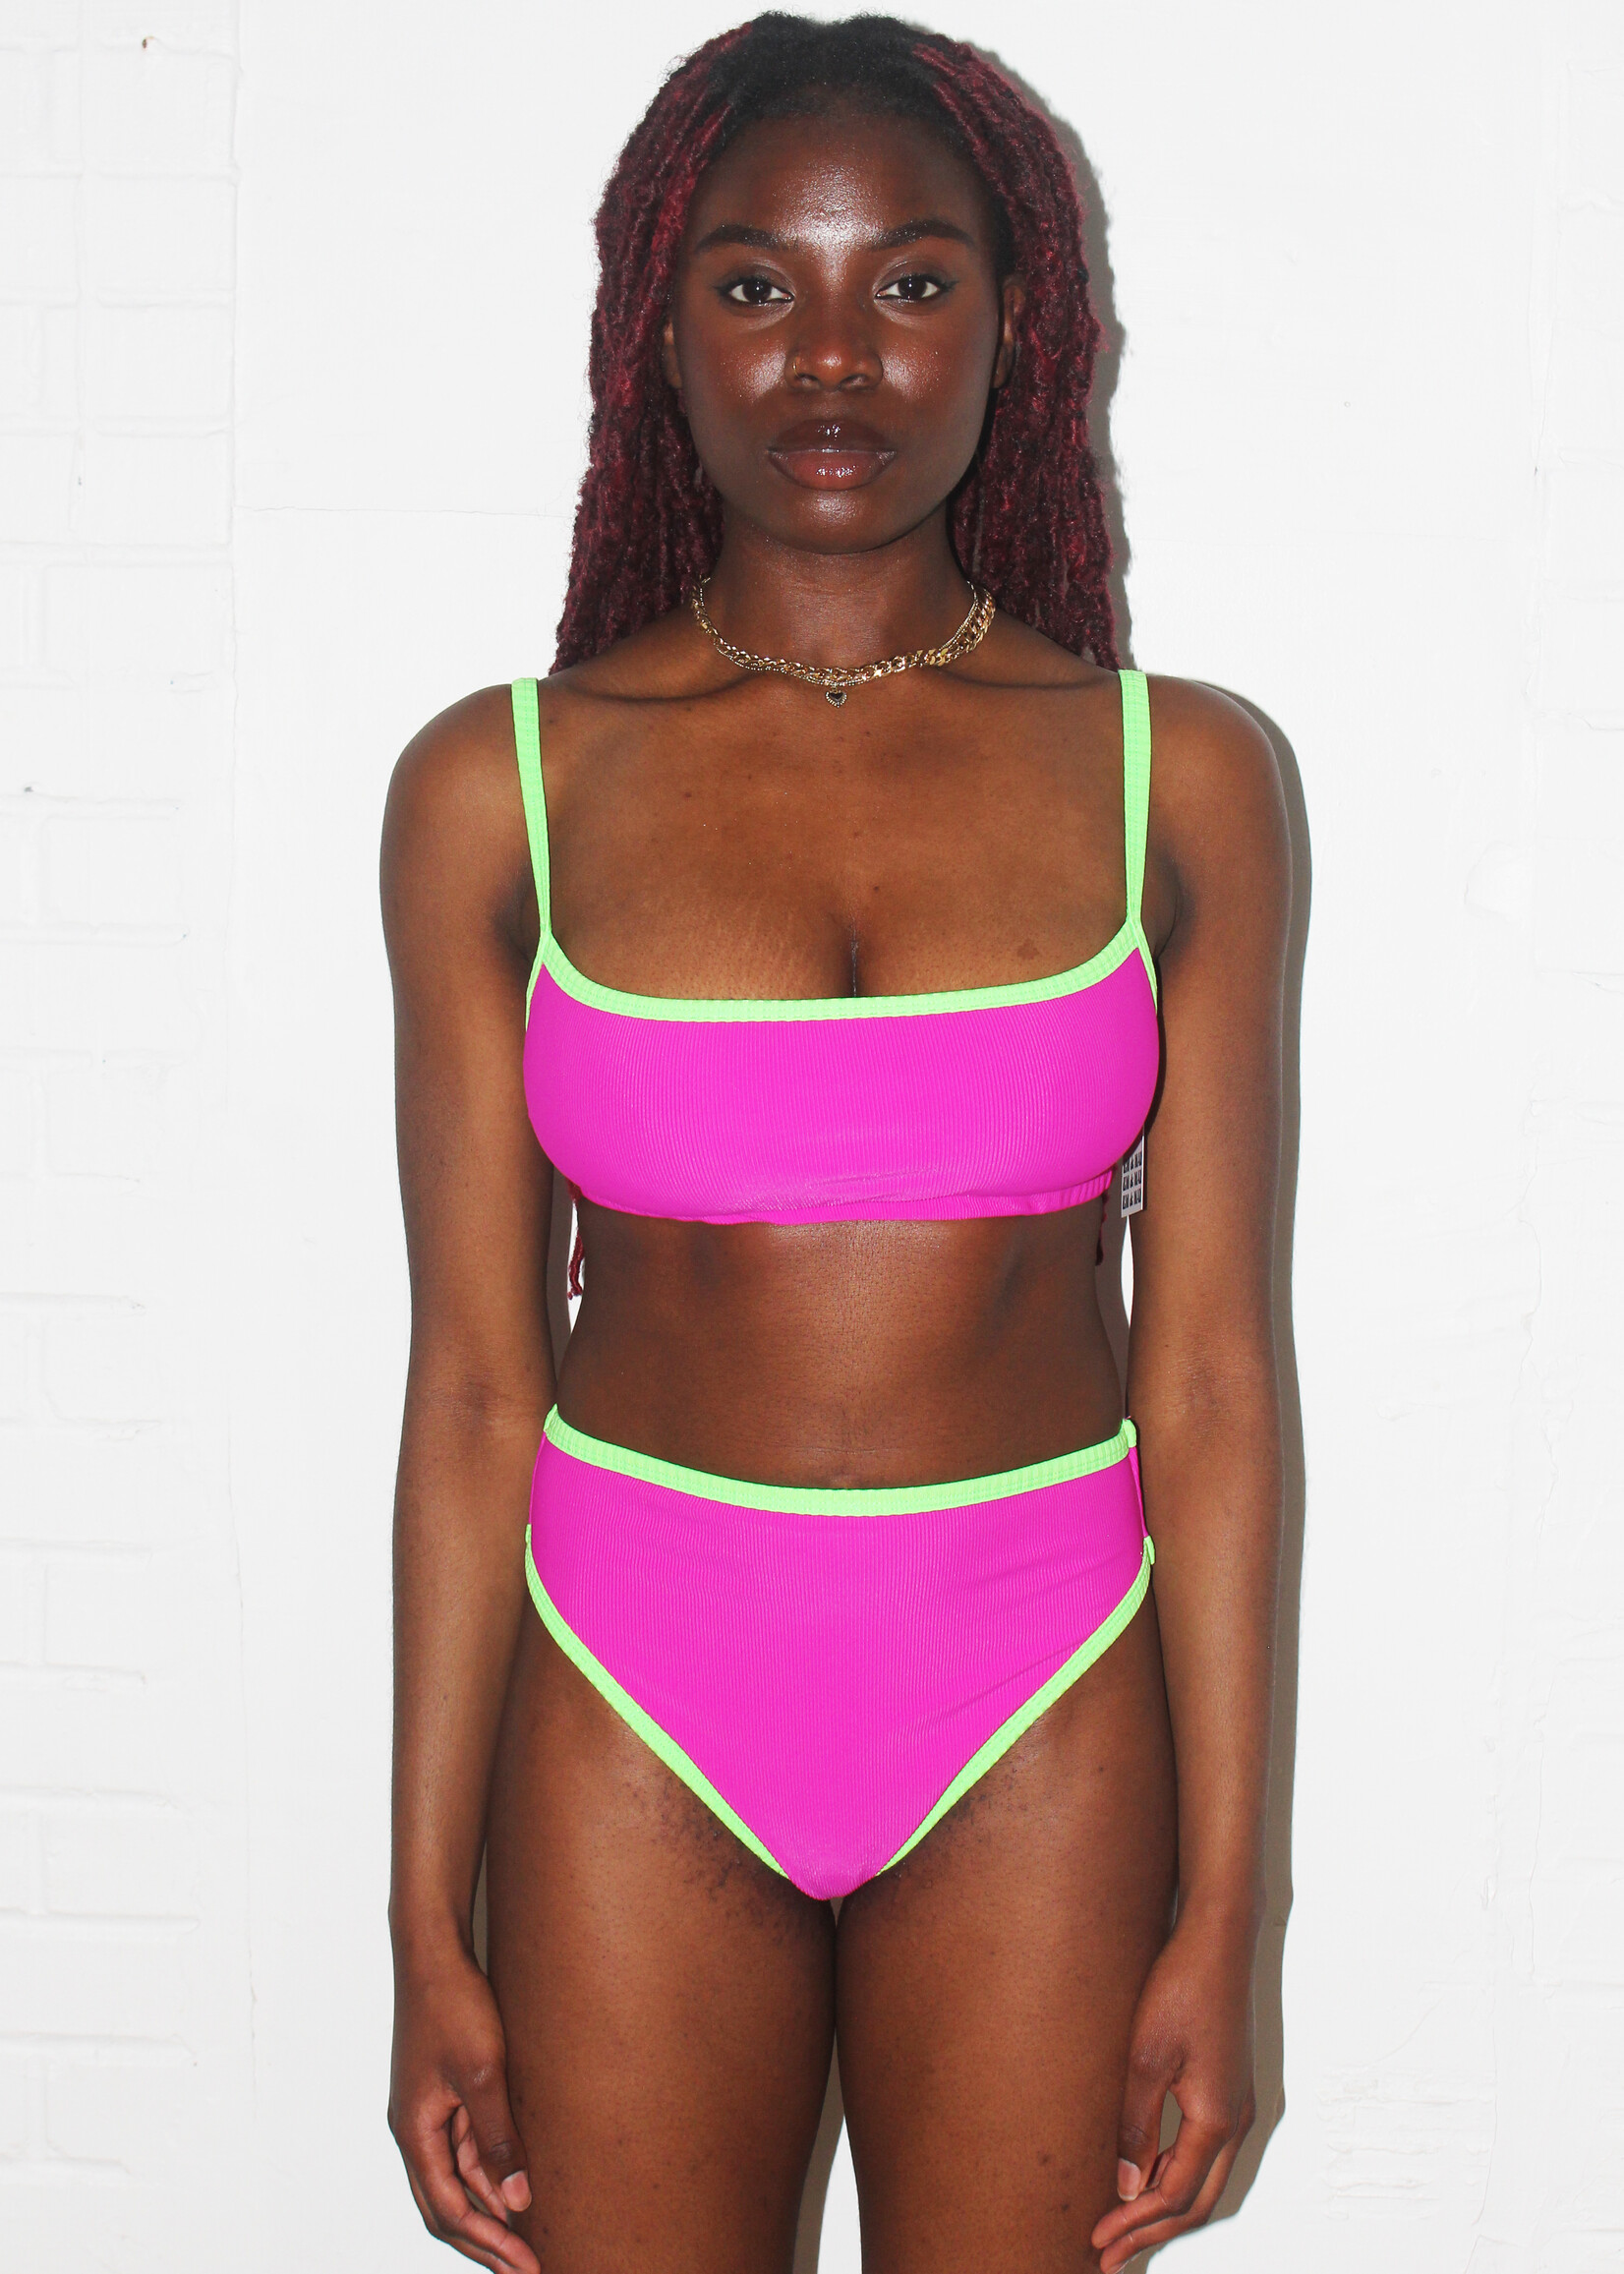 Studio Citizen x Em & May Studio Citizen x Em & May Lizzie Top in Pink and Green